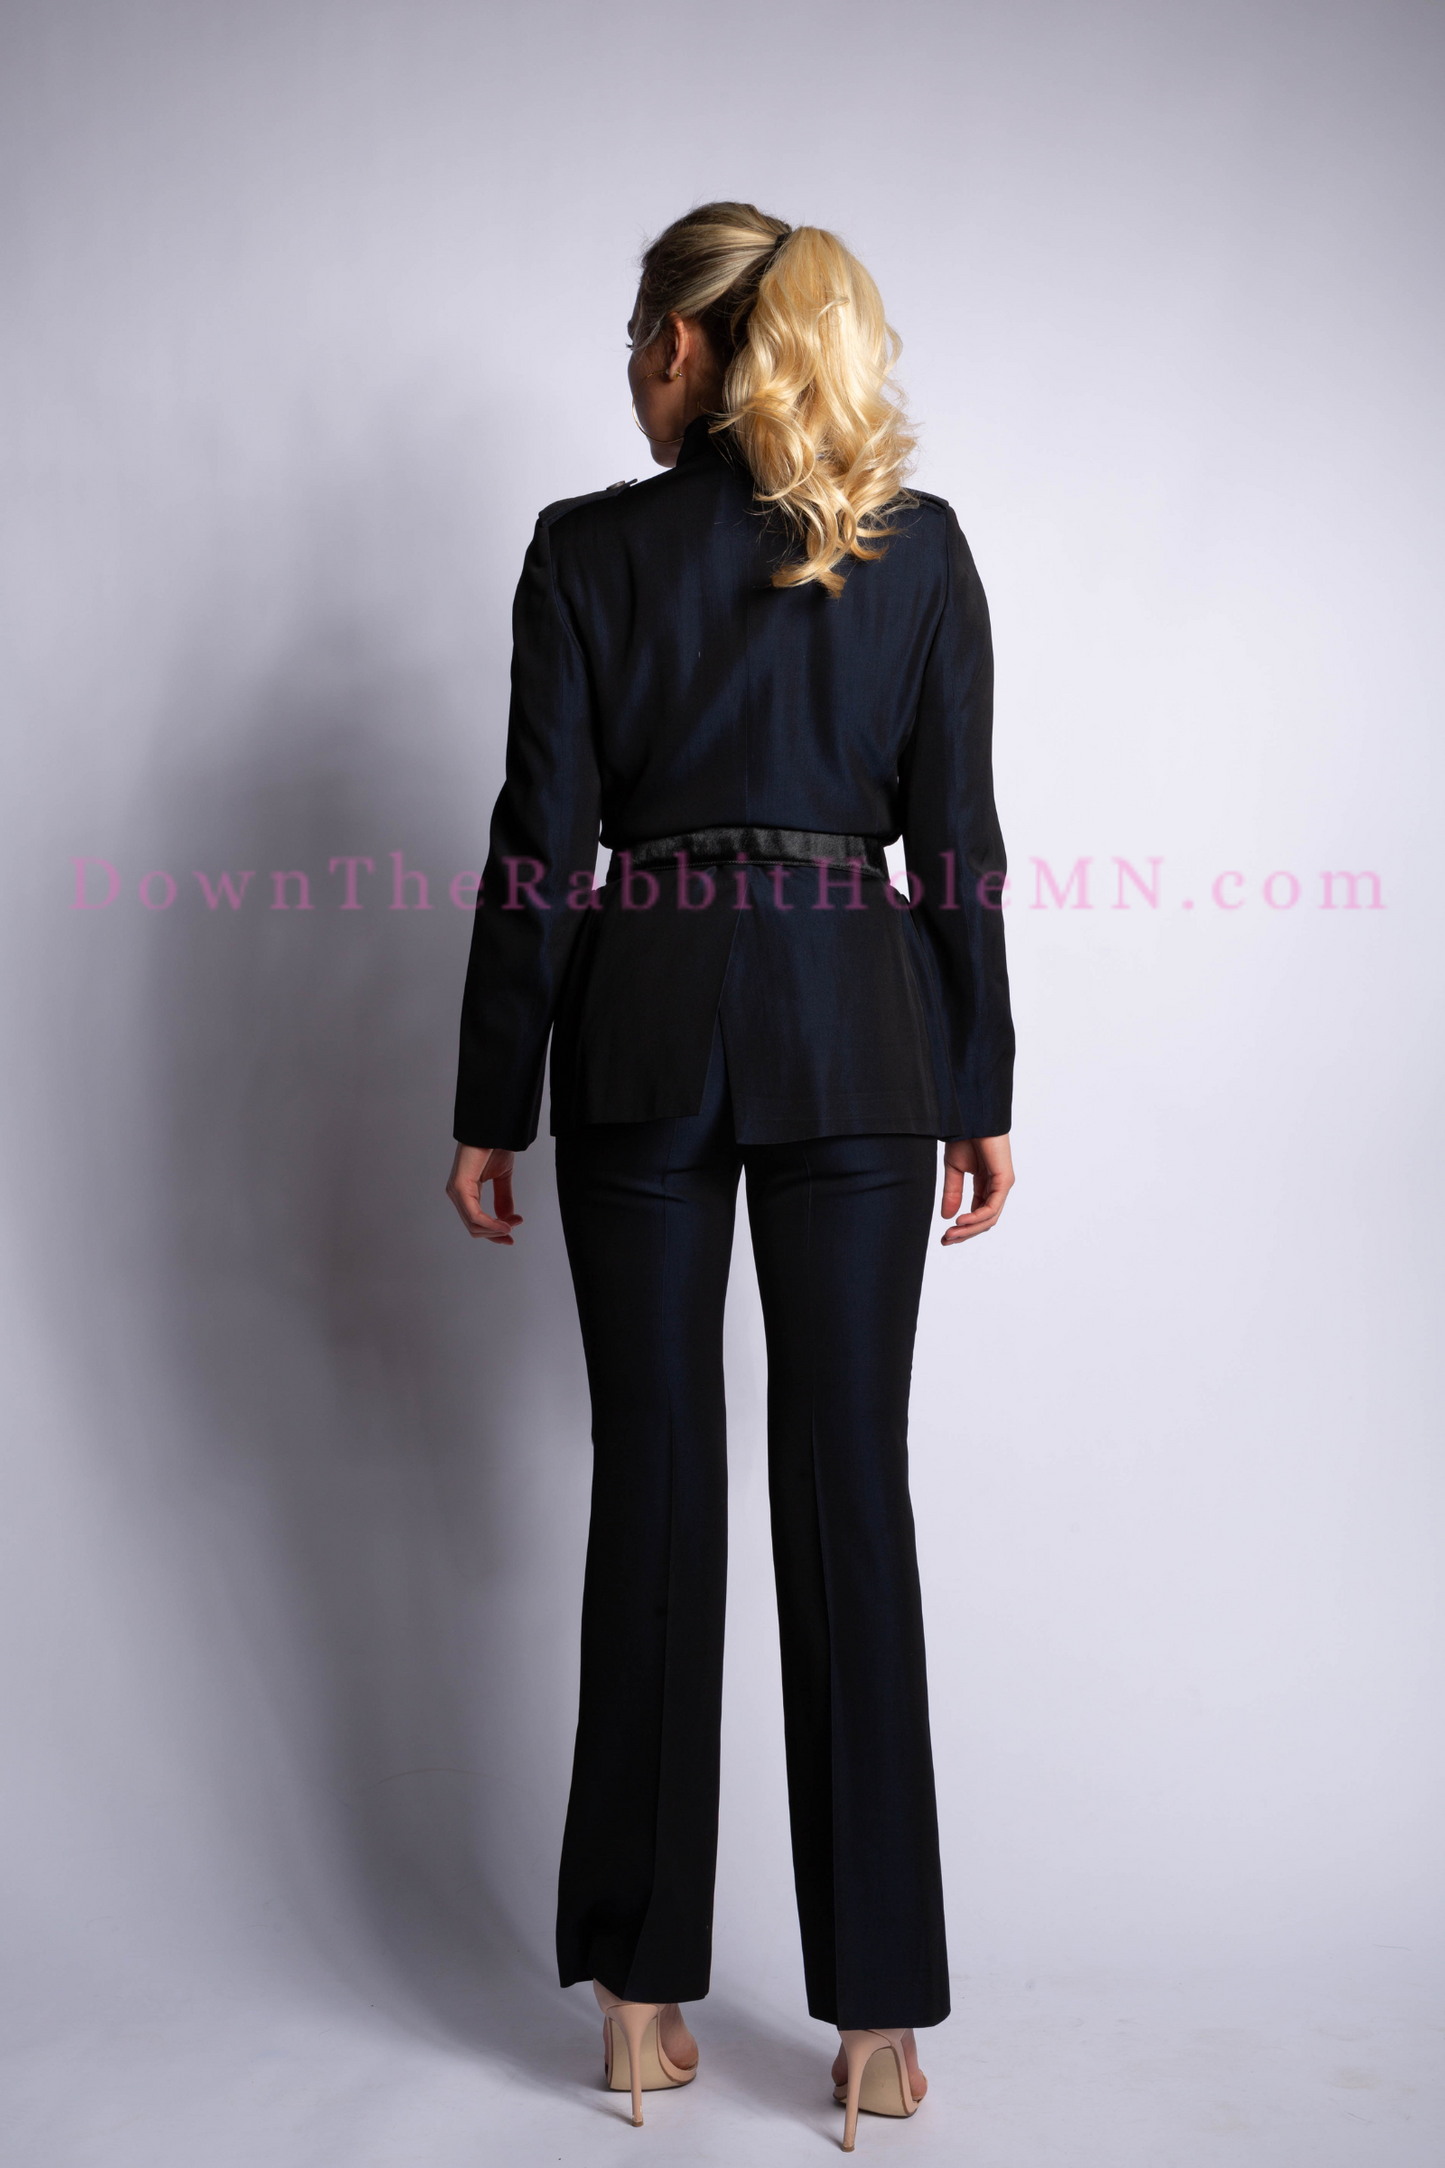 Gucci by Tom Ford F/W 1996 Runway Plunging Iridescent Navy Pantsuit